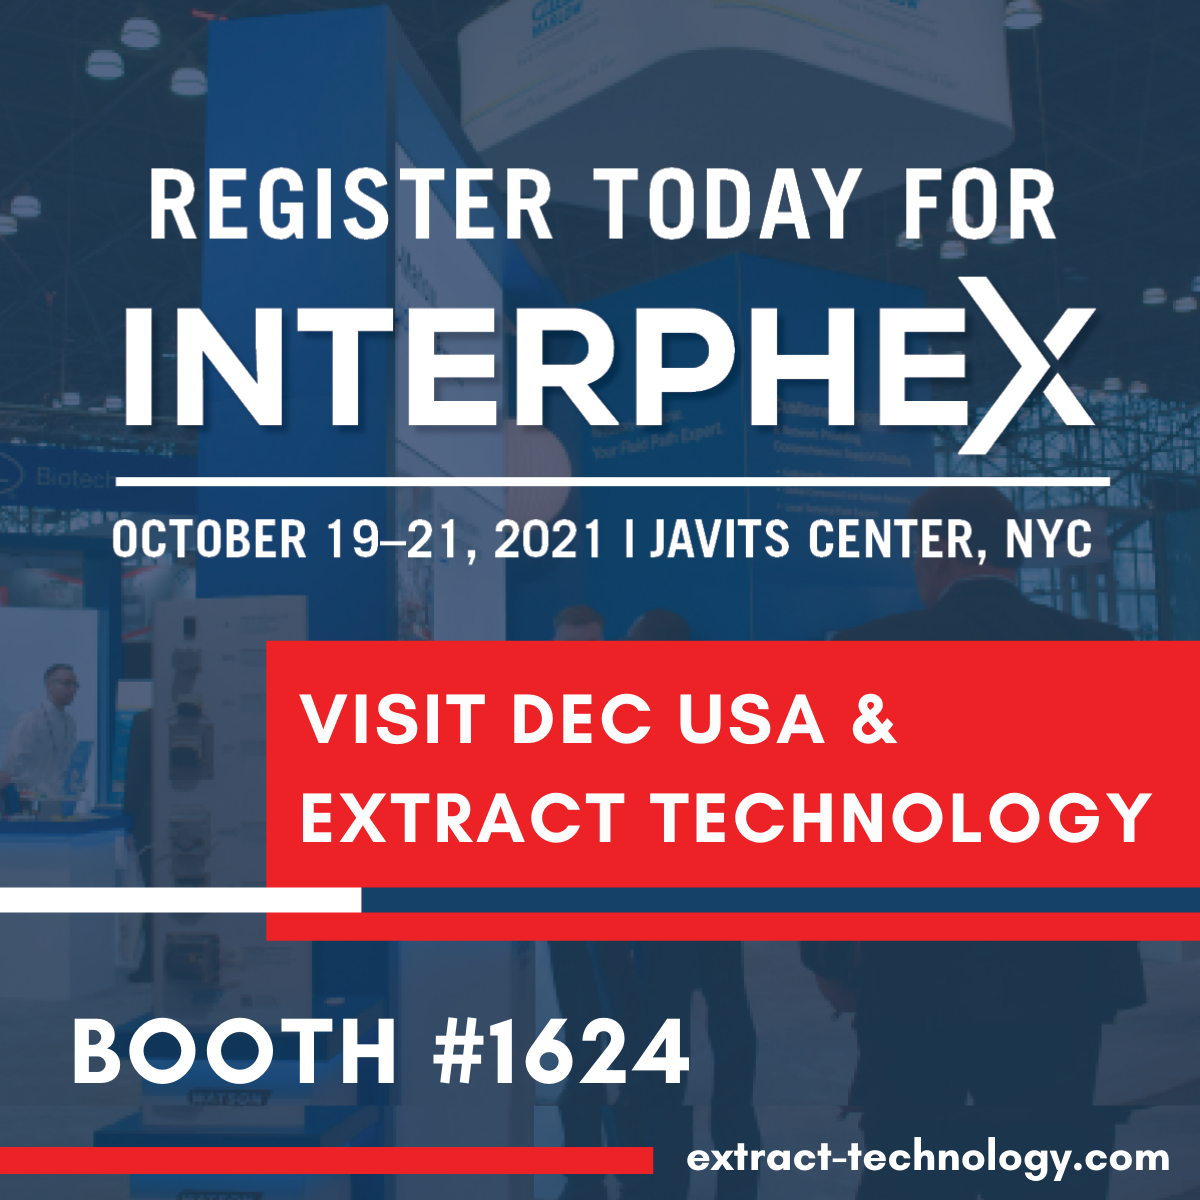 Reuniting at Interphex! Booth #1624 - Extract Technology and Dec Group